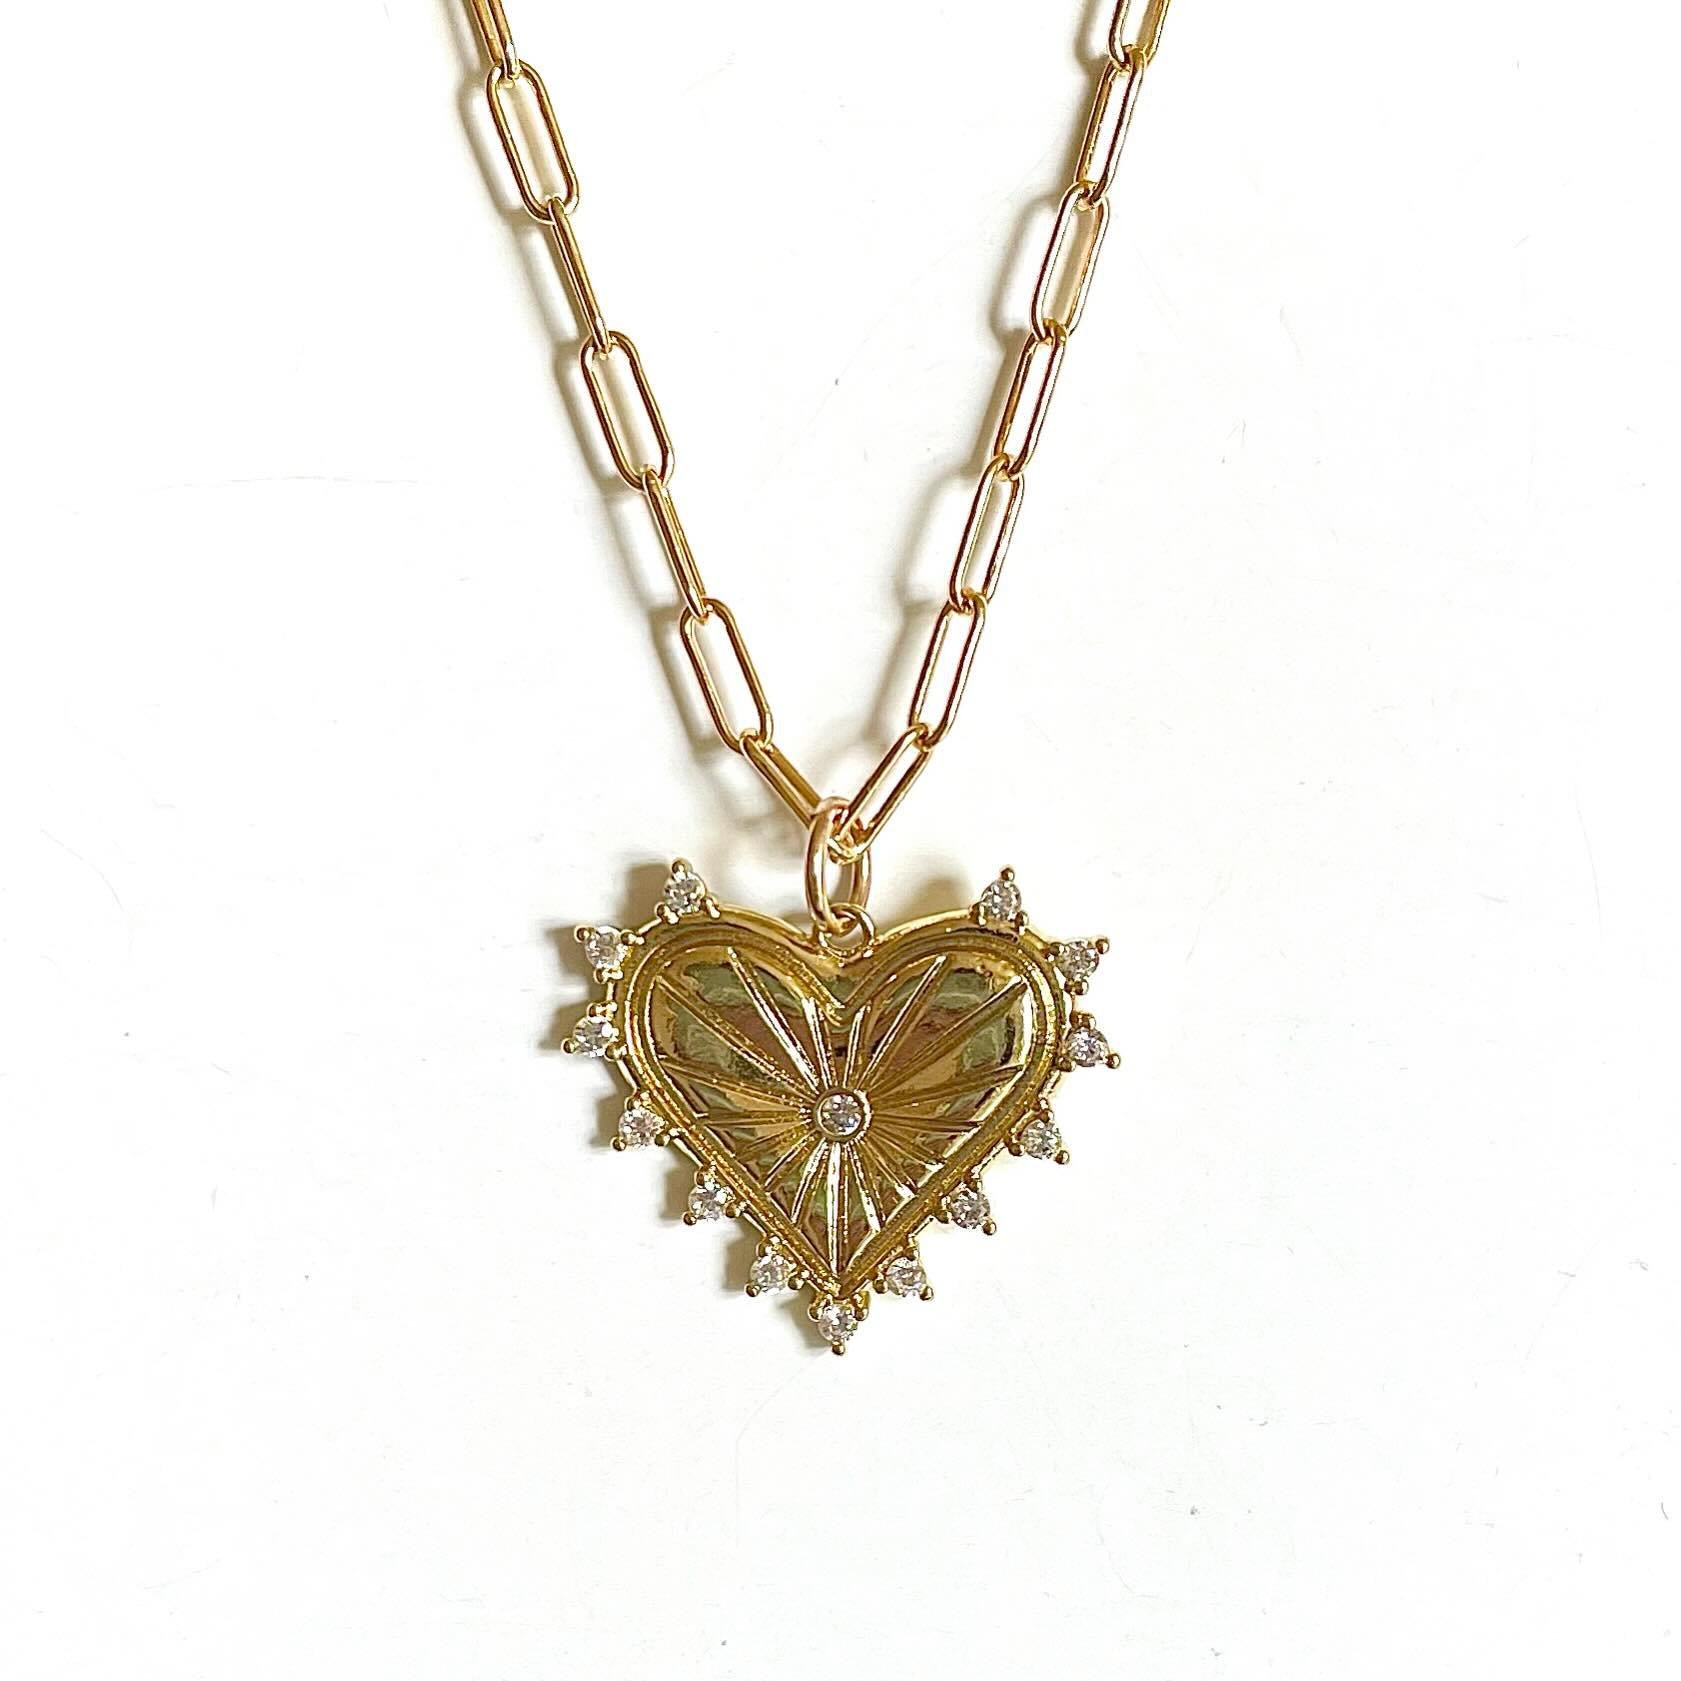 Radiate all the things with this lil beauty #heartmedallion #heartpendant #goldjewelry #trendyjewelry #mothersdaygifts #sanfrancisco #marincounty #jewelrydesigner #layeringnecklaces #elevate #jennifertutonjewelry